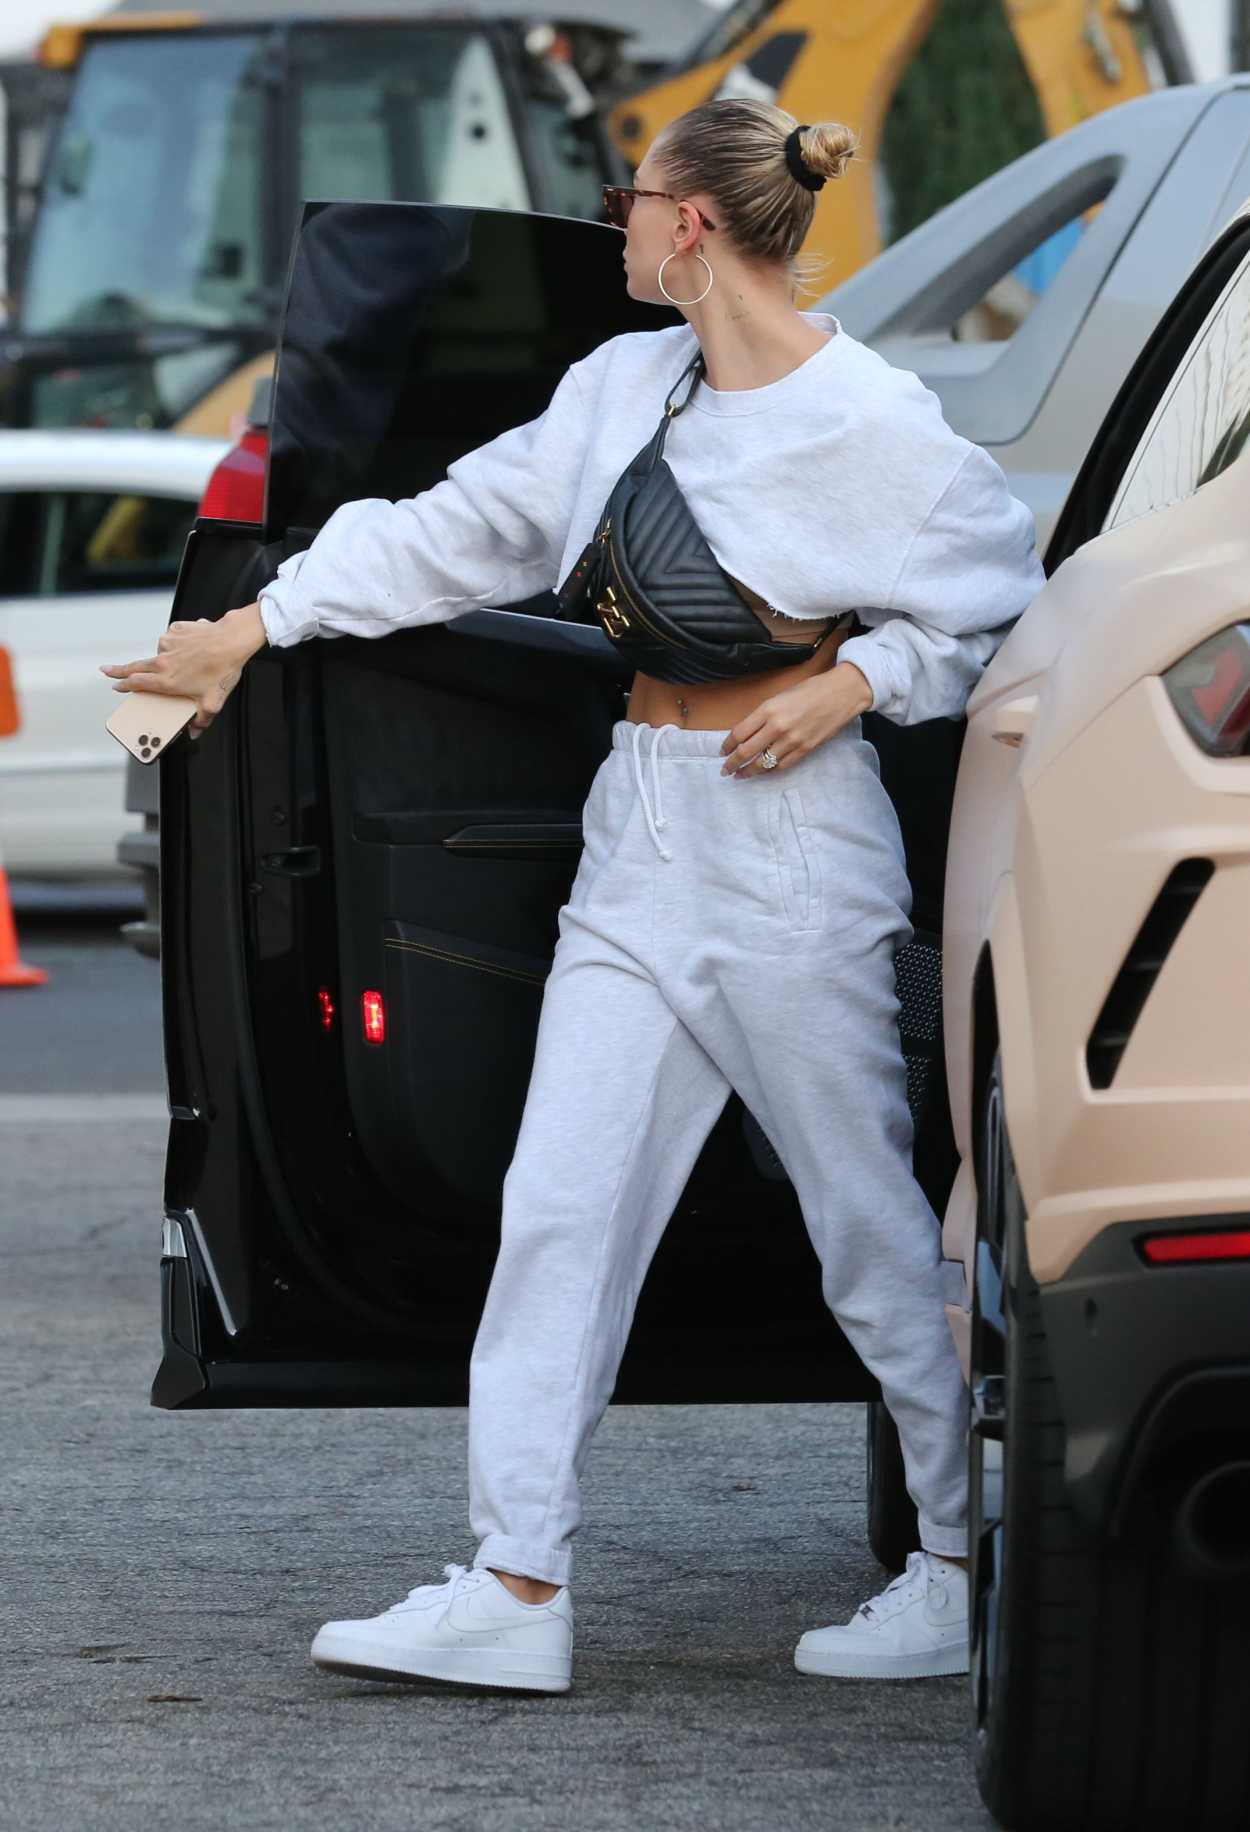 Hailey Bieber in a White Sneakers Hits the Salon in Beverly Hills 11/16/2019 â celebsla.com